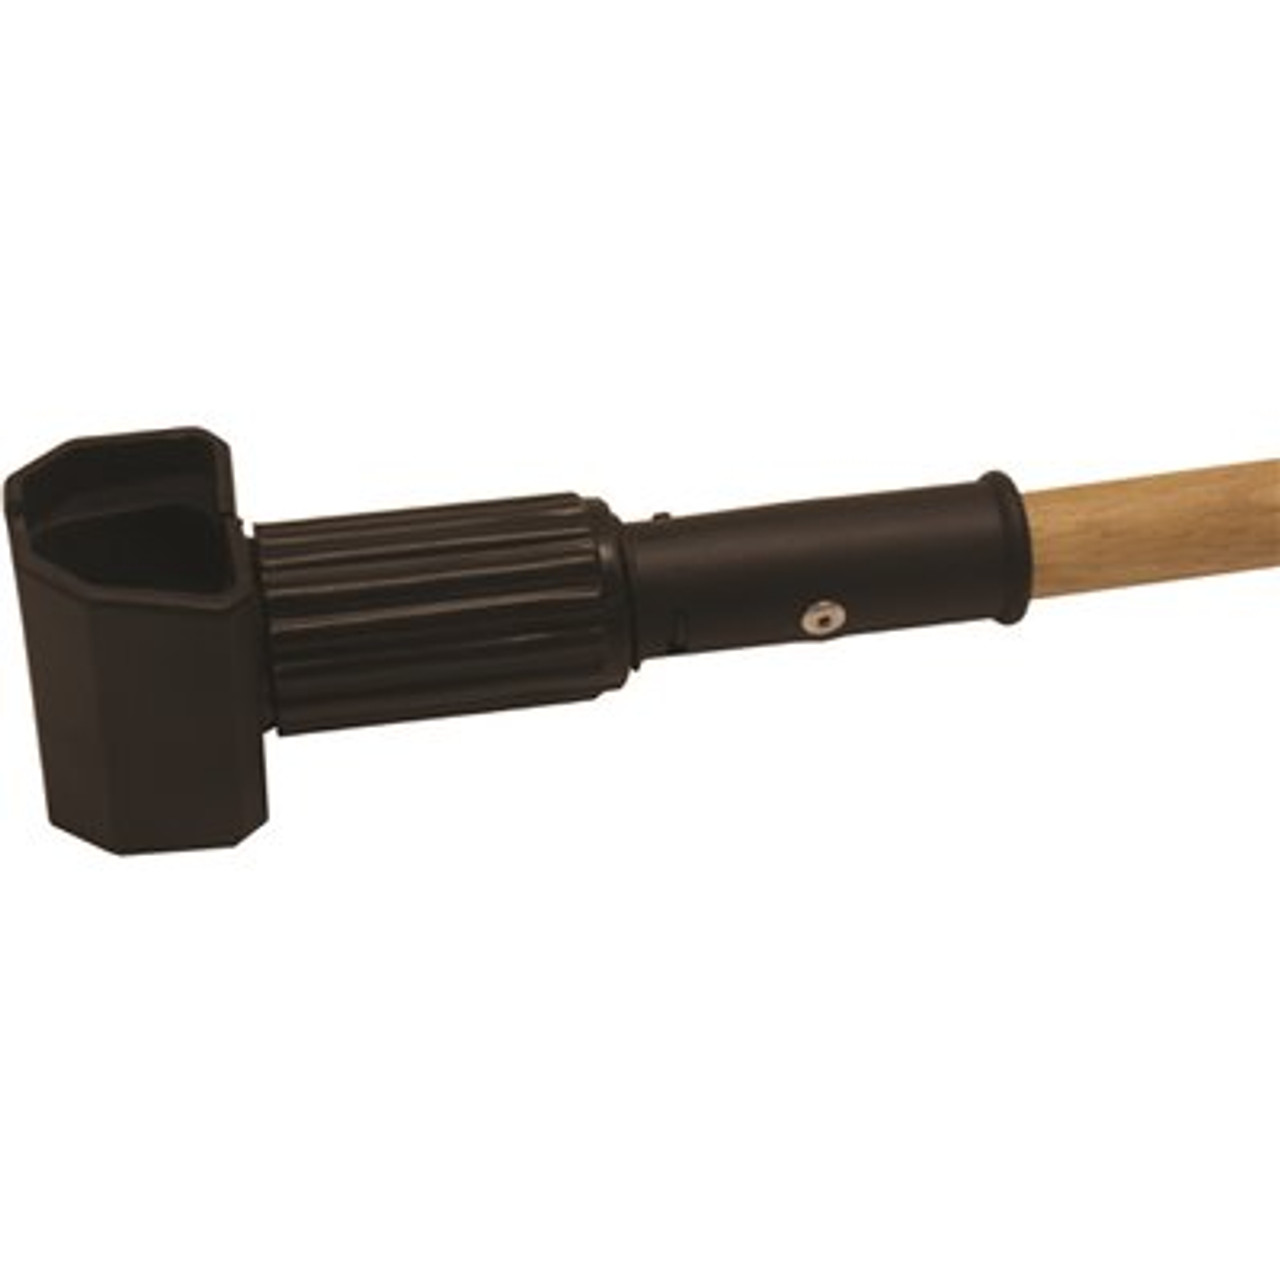 Renown 60 in. Wood Mop Handle Clencher Each